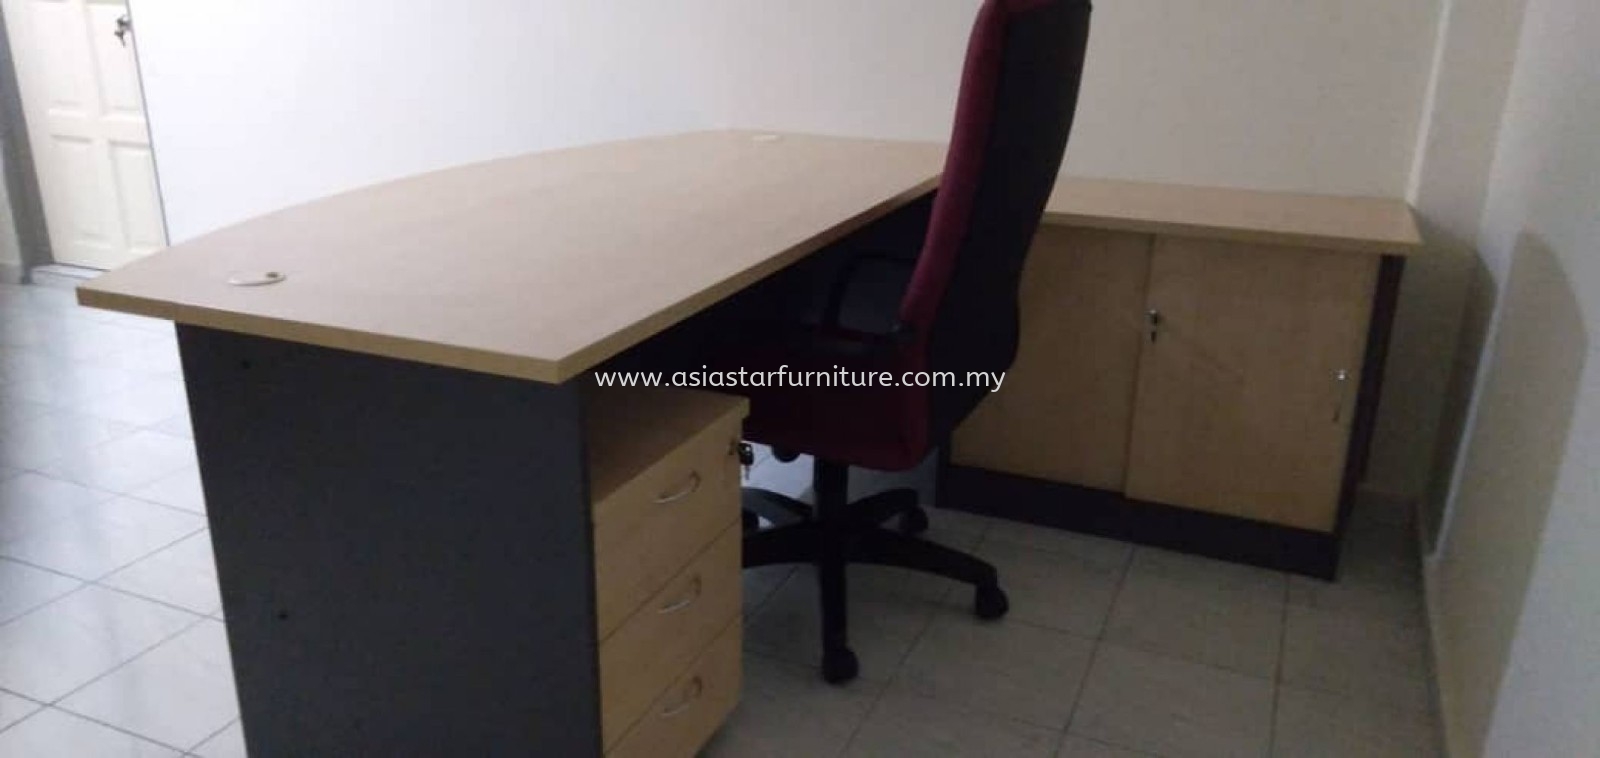 DELIVERY & INSTALLATION DIRECTOR OFFICE TABLE WDB80-SD24D3+M3 WITH SIDE CABINET & MOBILE DRAWER 3D OFFICE FURNITURE KLANG